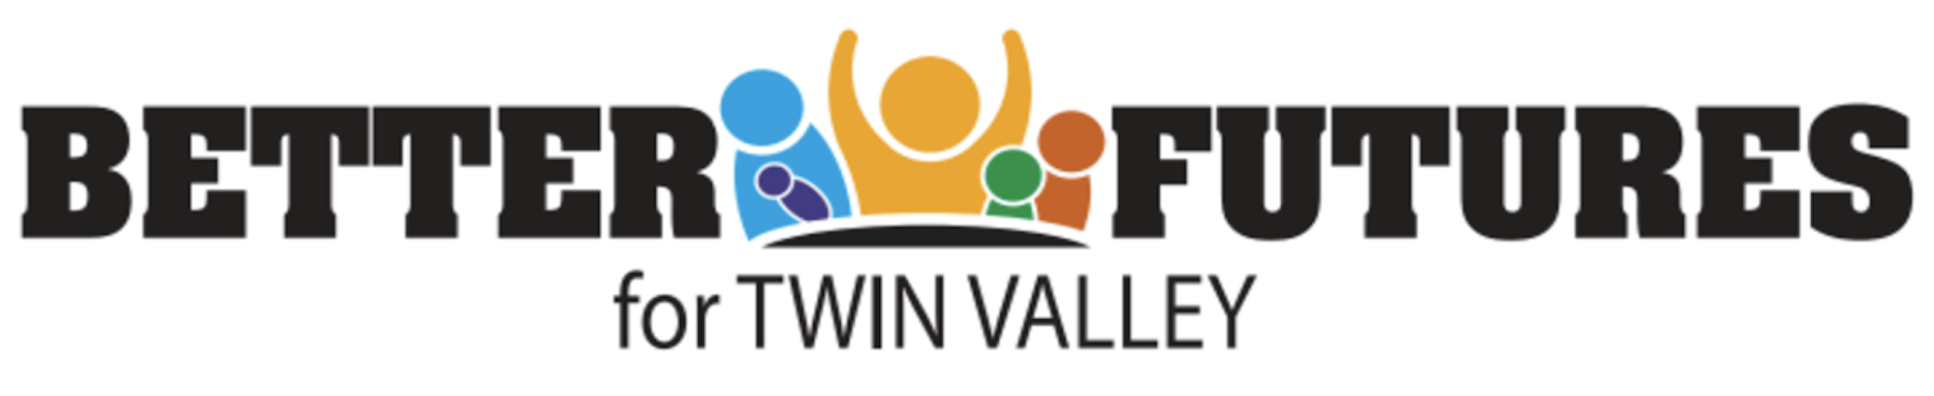 Better futures for Twin Valley Logo image